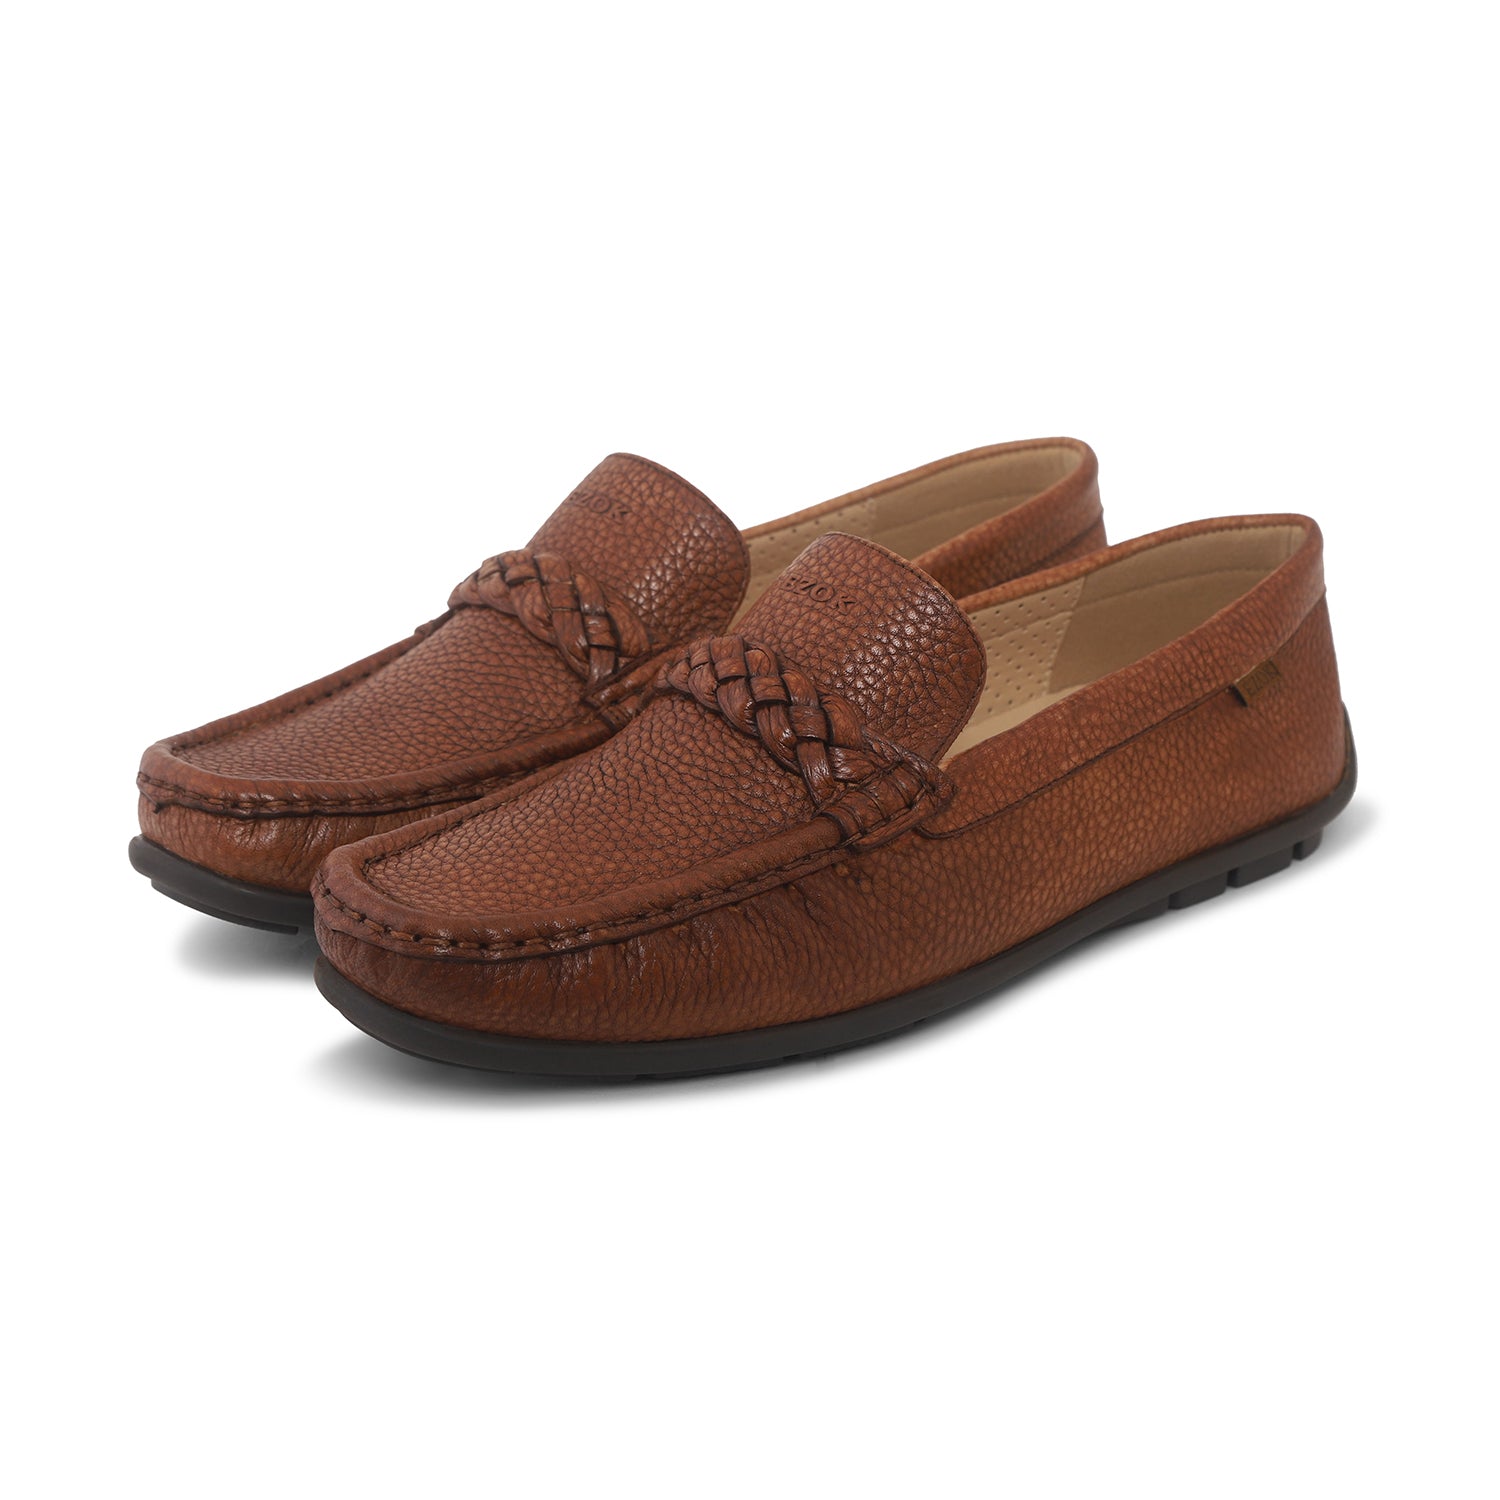 Ezok Mens Tan Moccasin Driving Leather Loafers